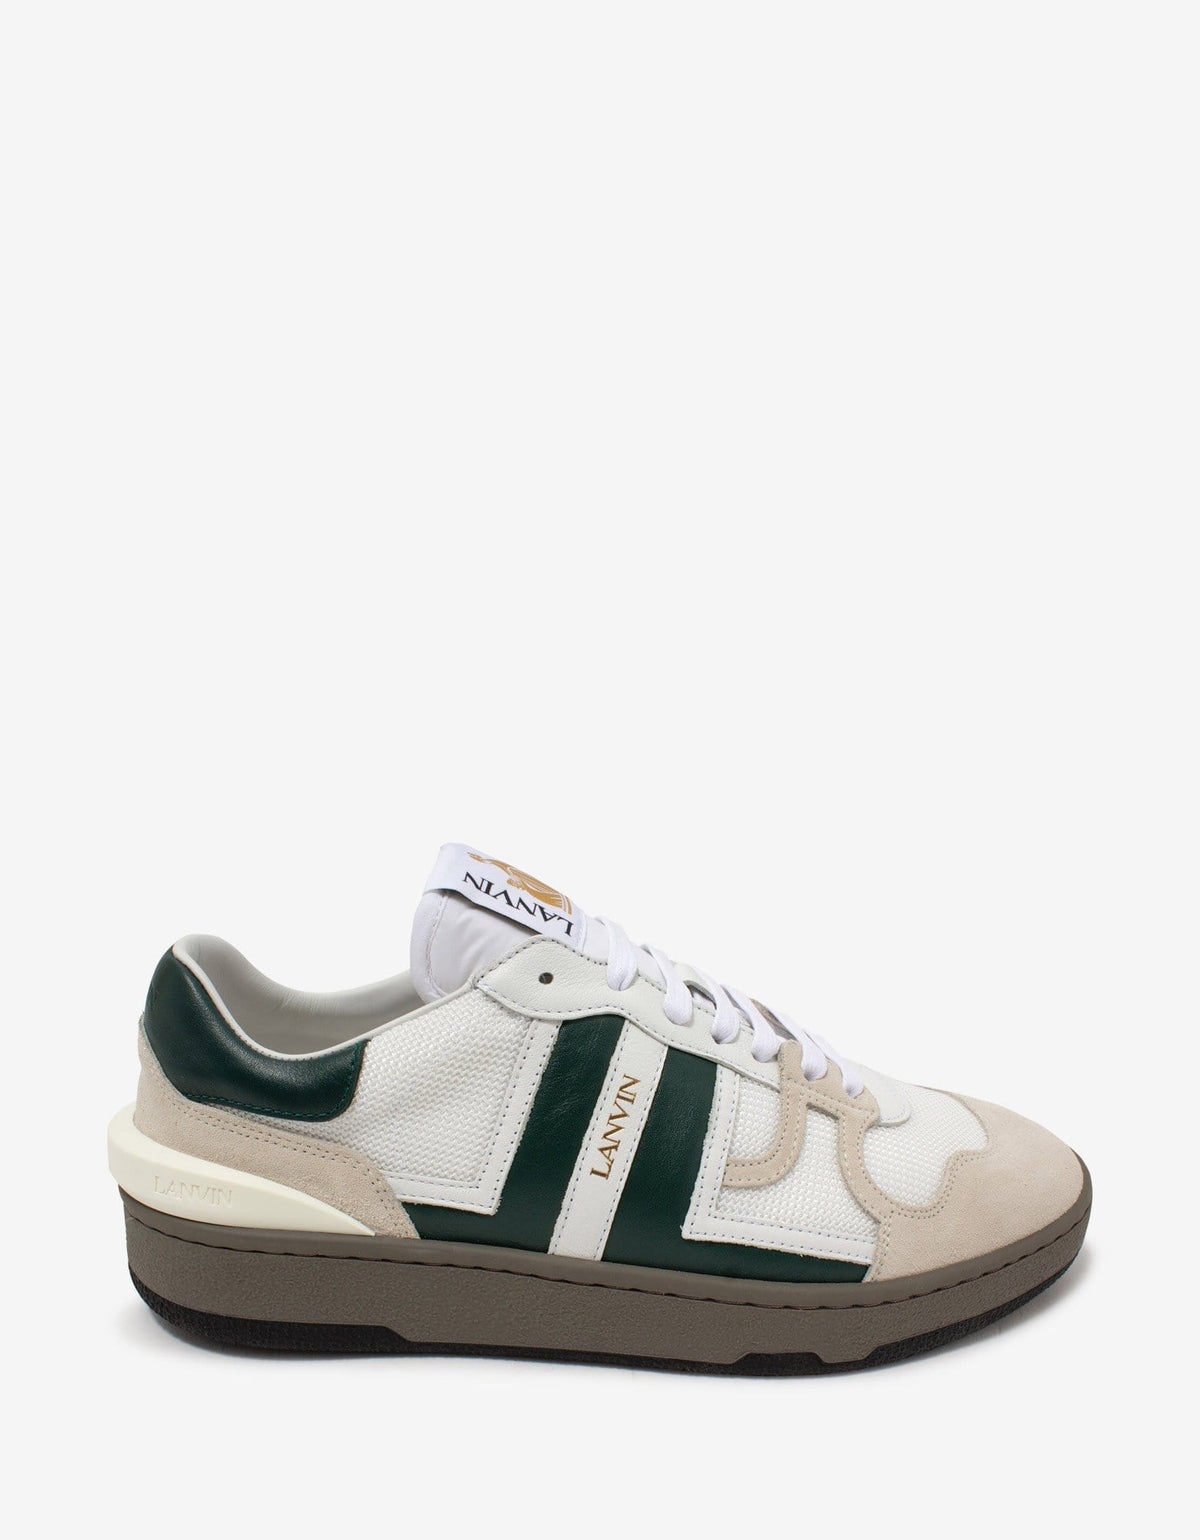 Lanvin Clay White & Green Tennis Trainers